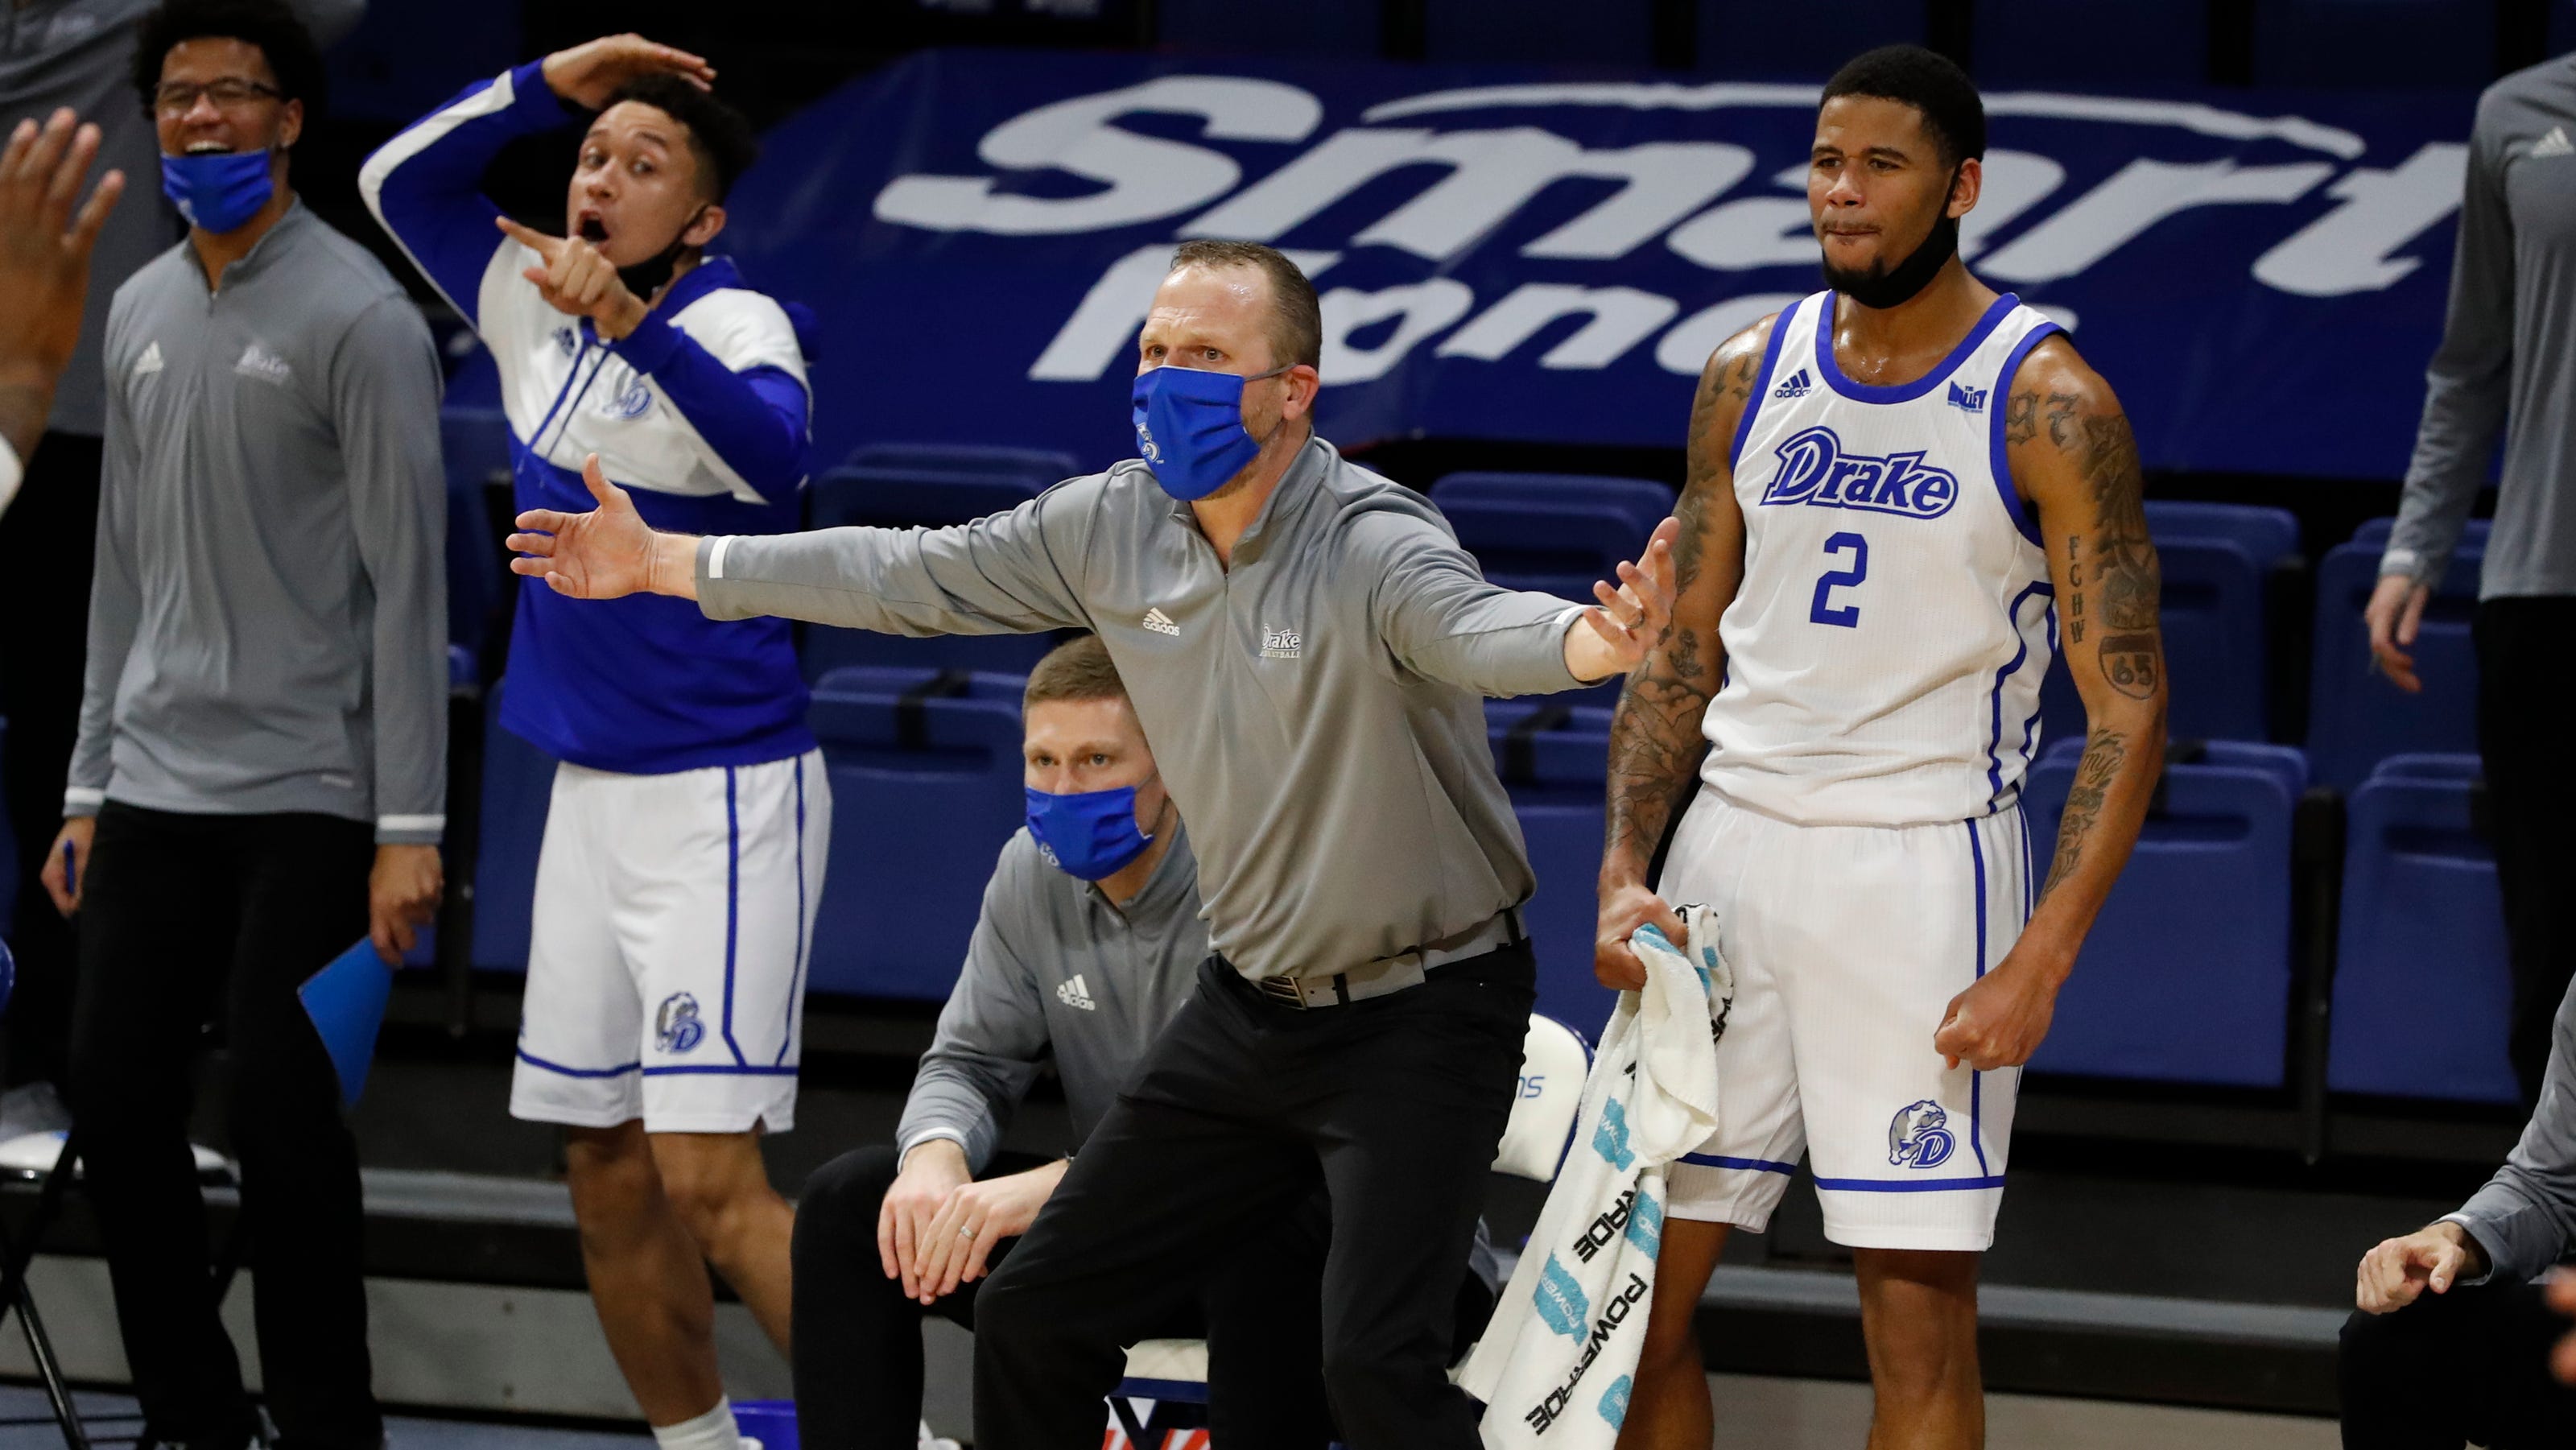 NCAA Tournament bubble has 7 teams sweating out a bid to March Madness